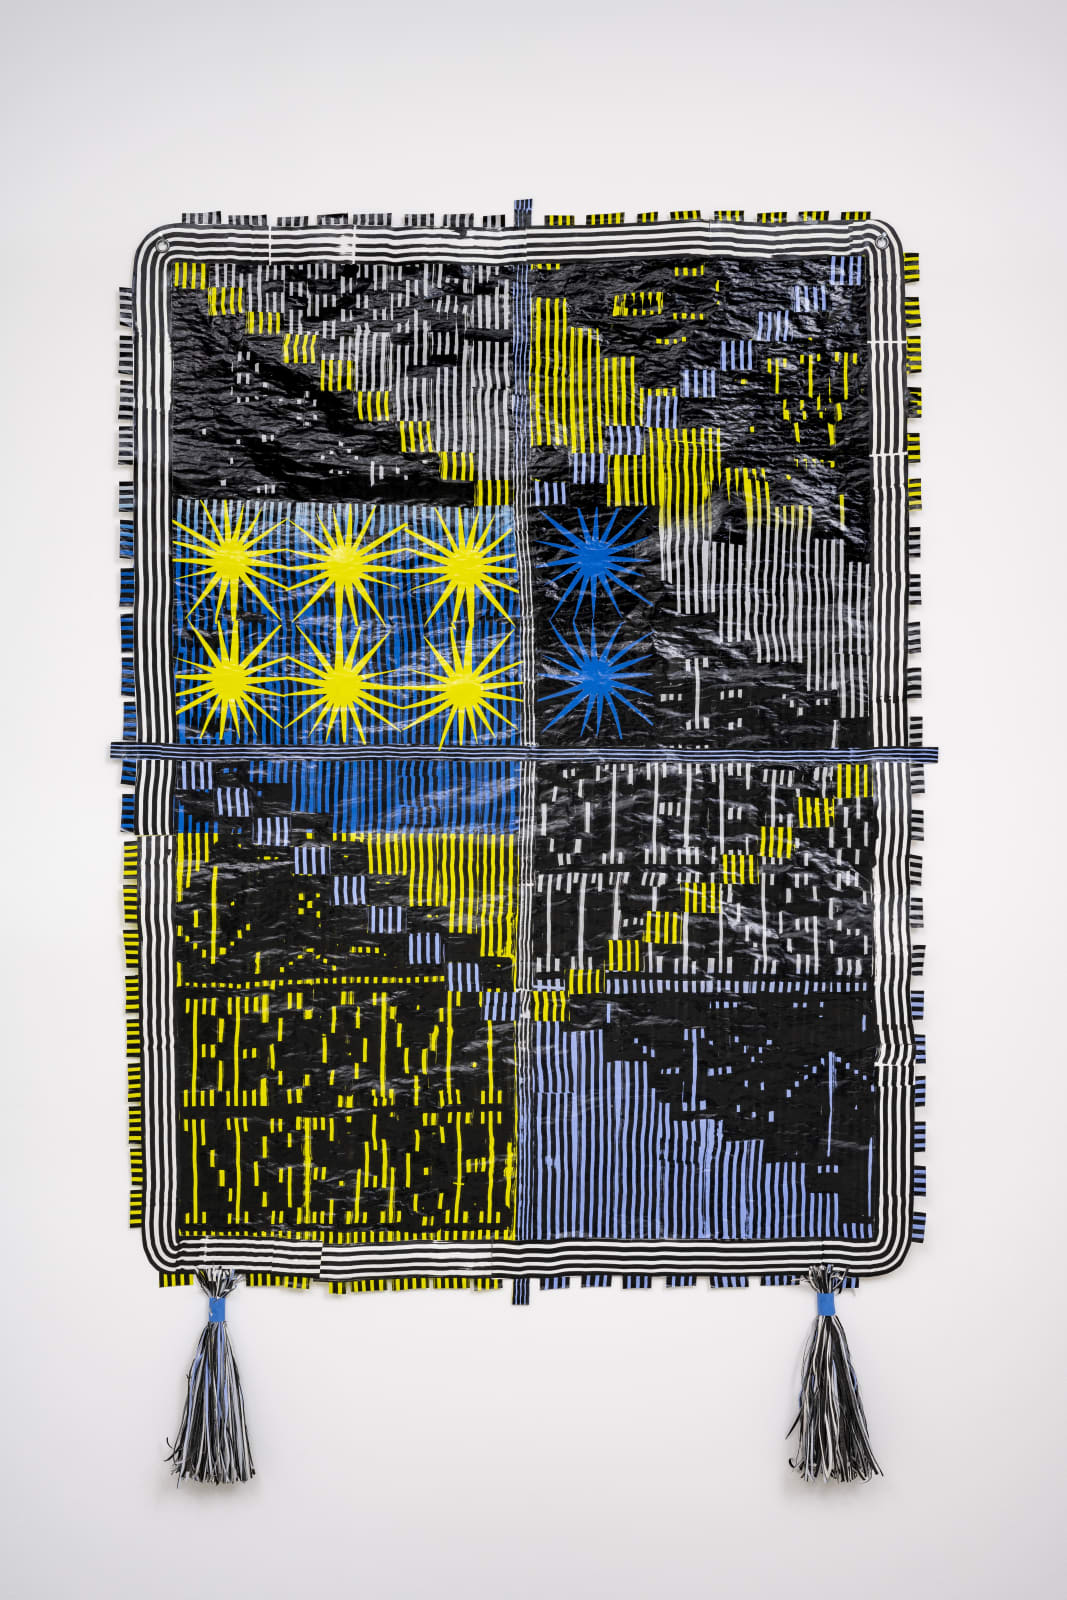 Sofía Clausse Paper Tapestry #3, 2021 Acrylic on paper and mixed media 90 x 150 cm